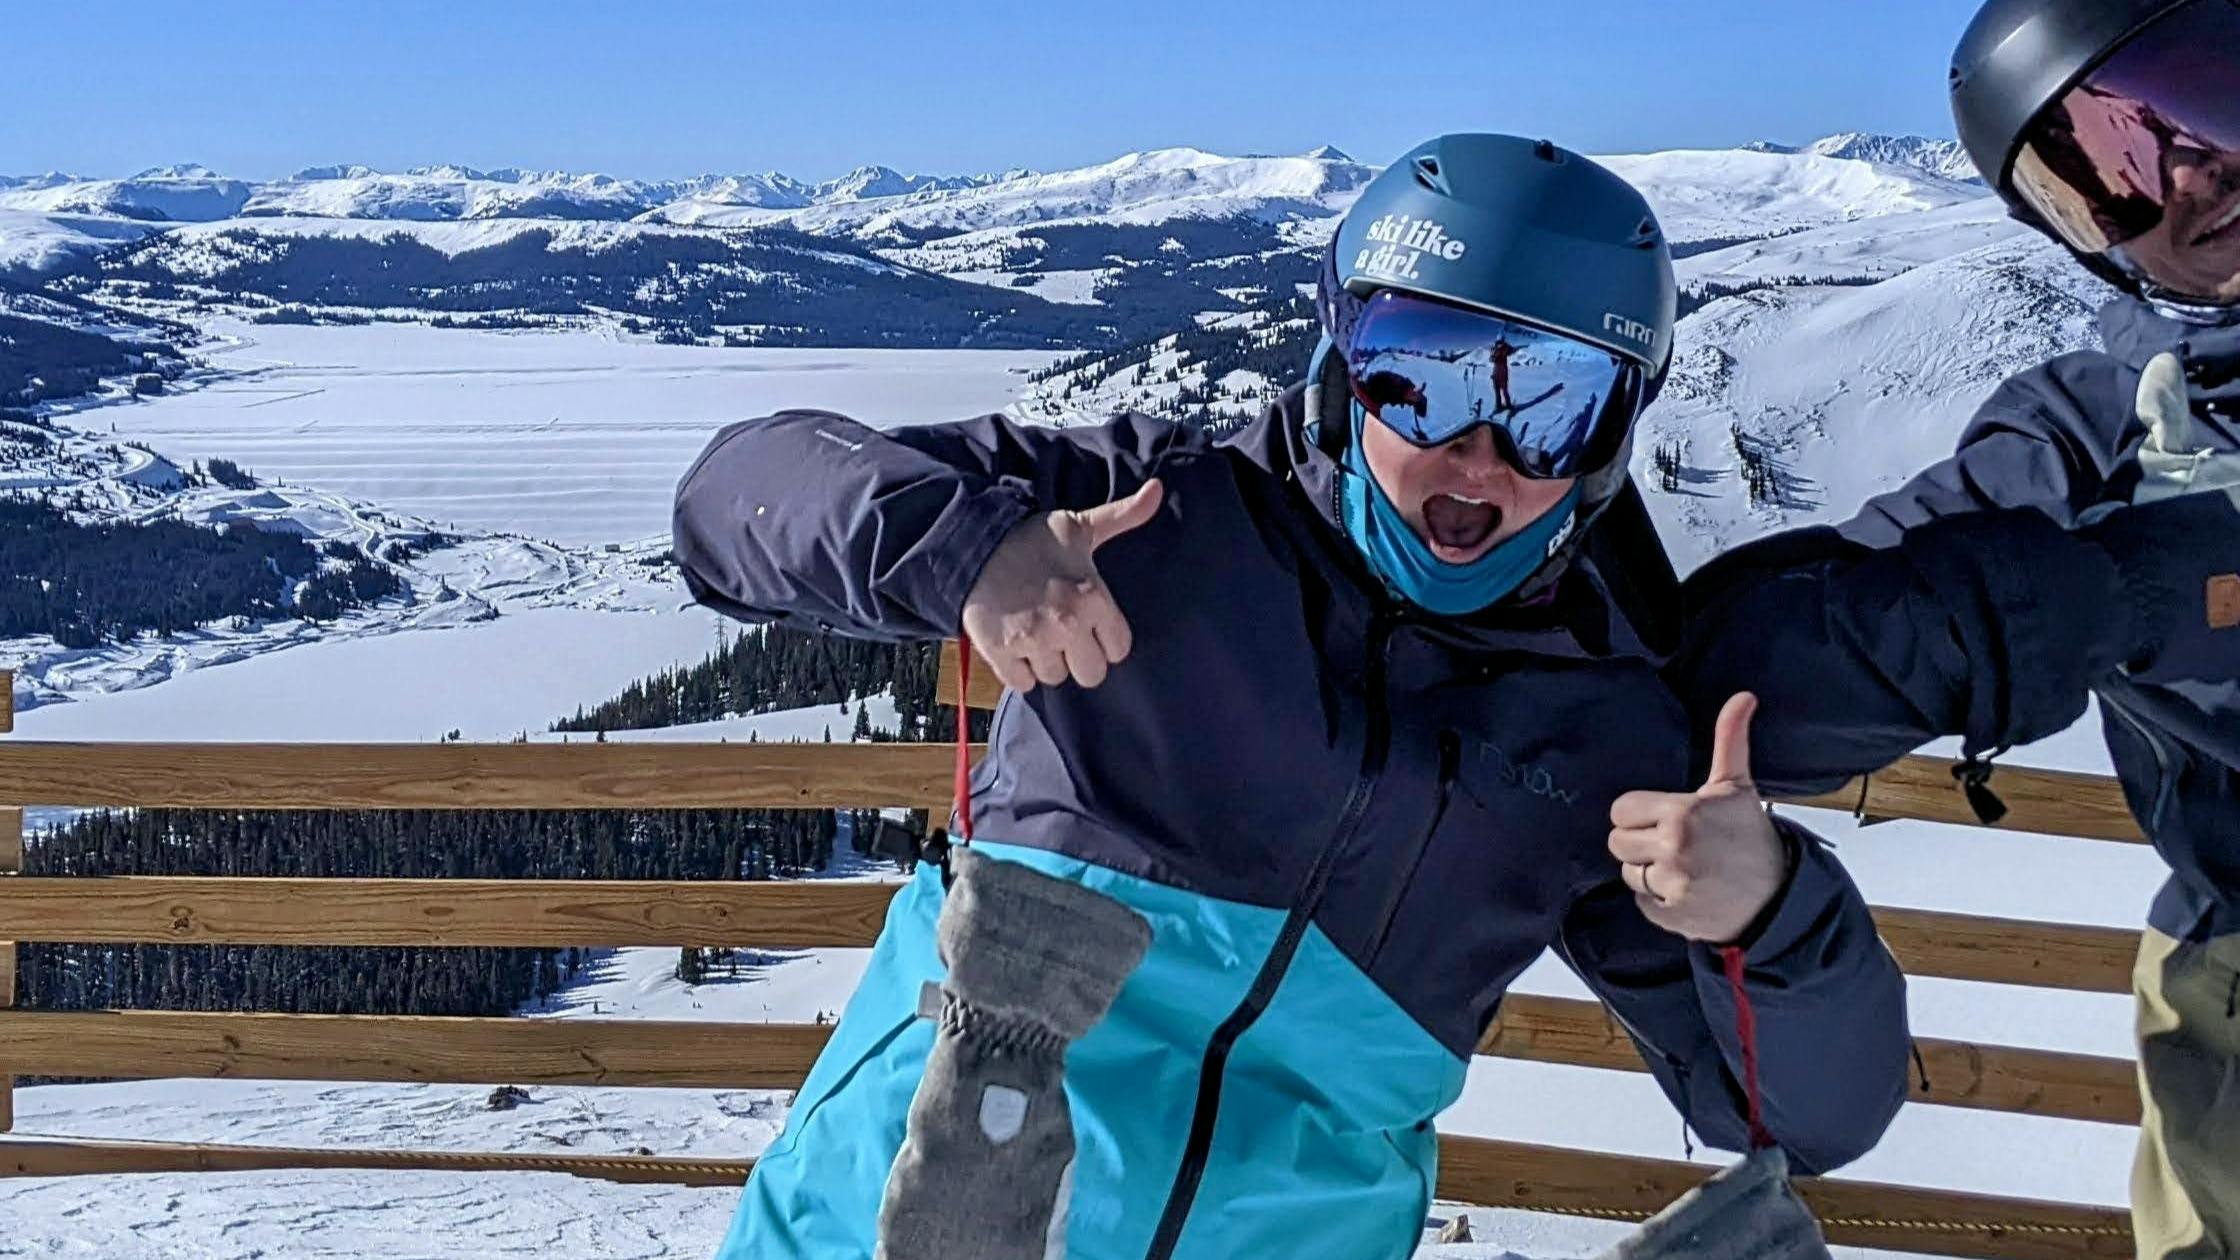 Two skiers on a ski run giving a thumbs up to the camera. There are snowy mountains in the background. 